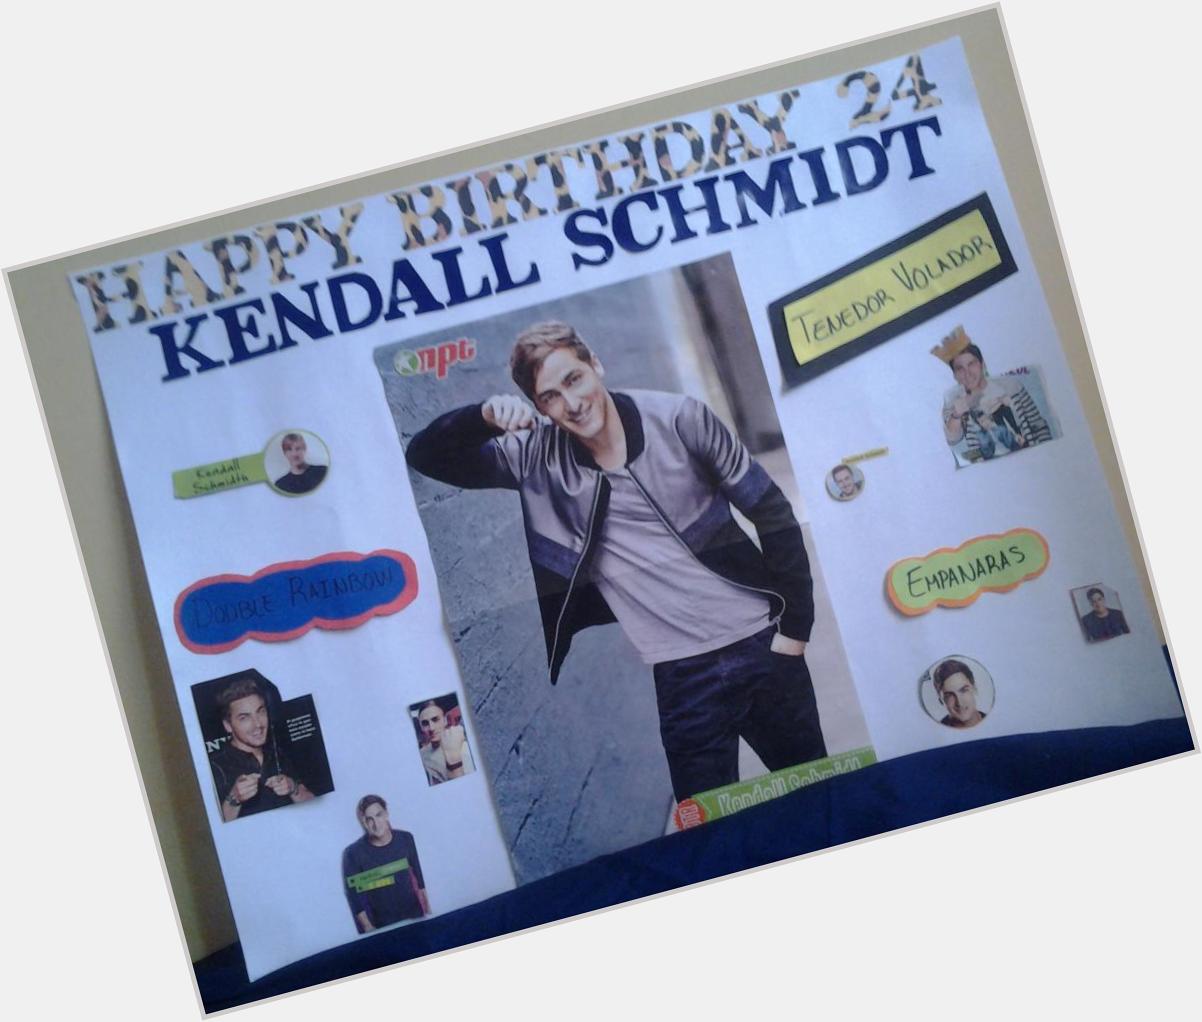 Happy Birthday Kendall Schmidt
TANK YOU FOR EXISTING 
I Love You   !!!!      